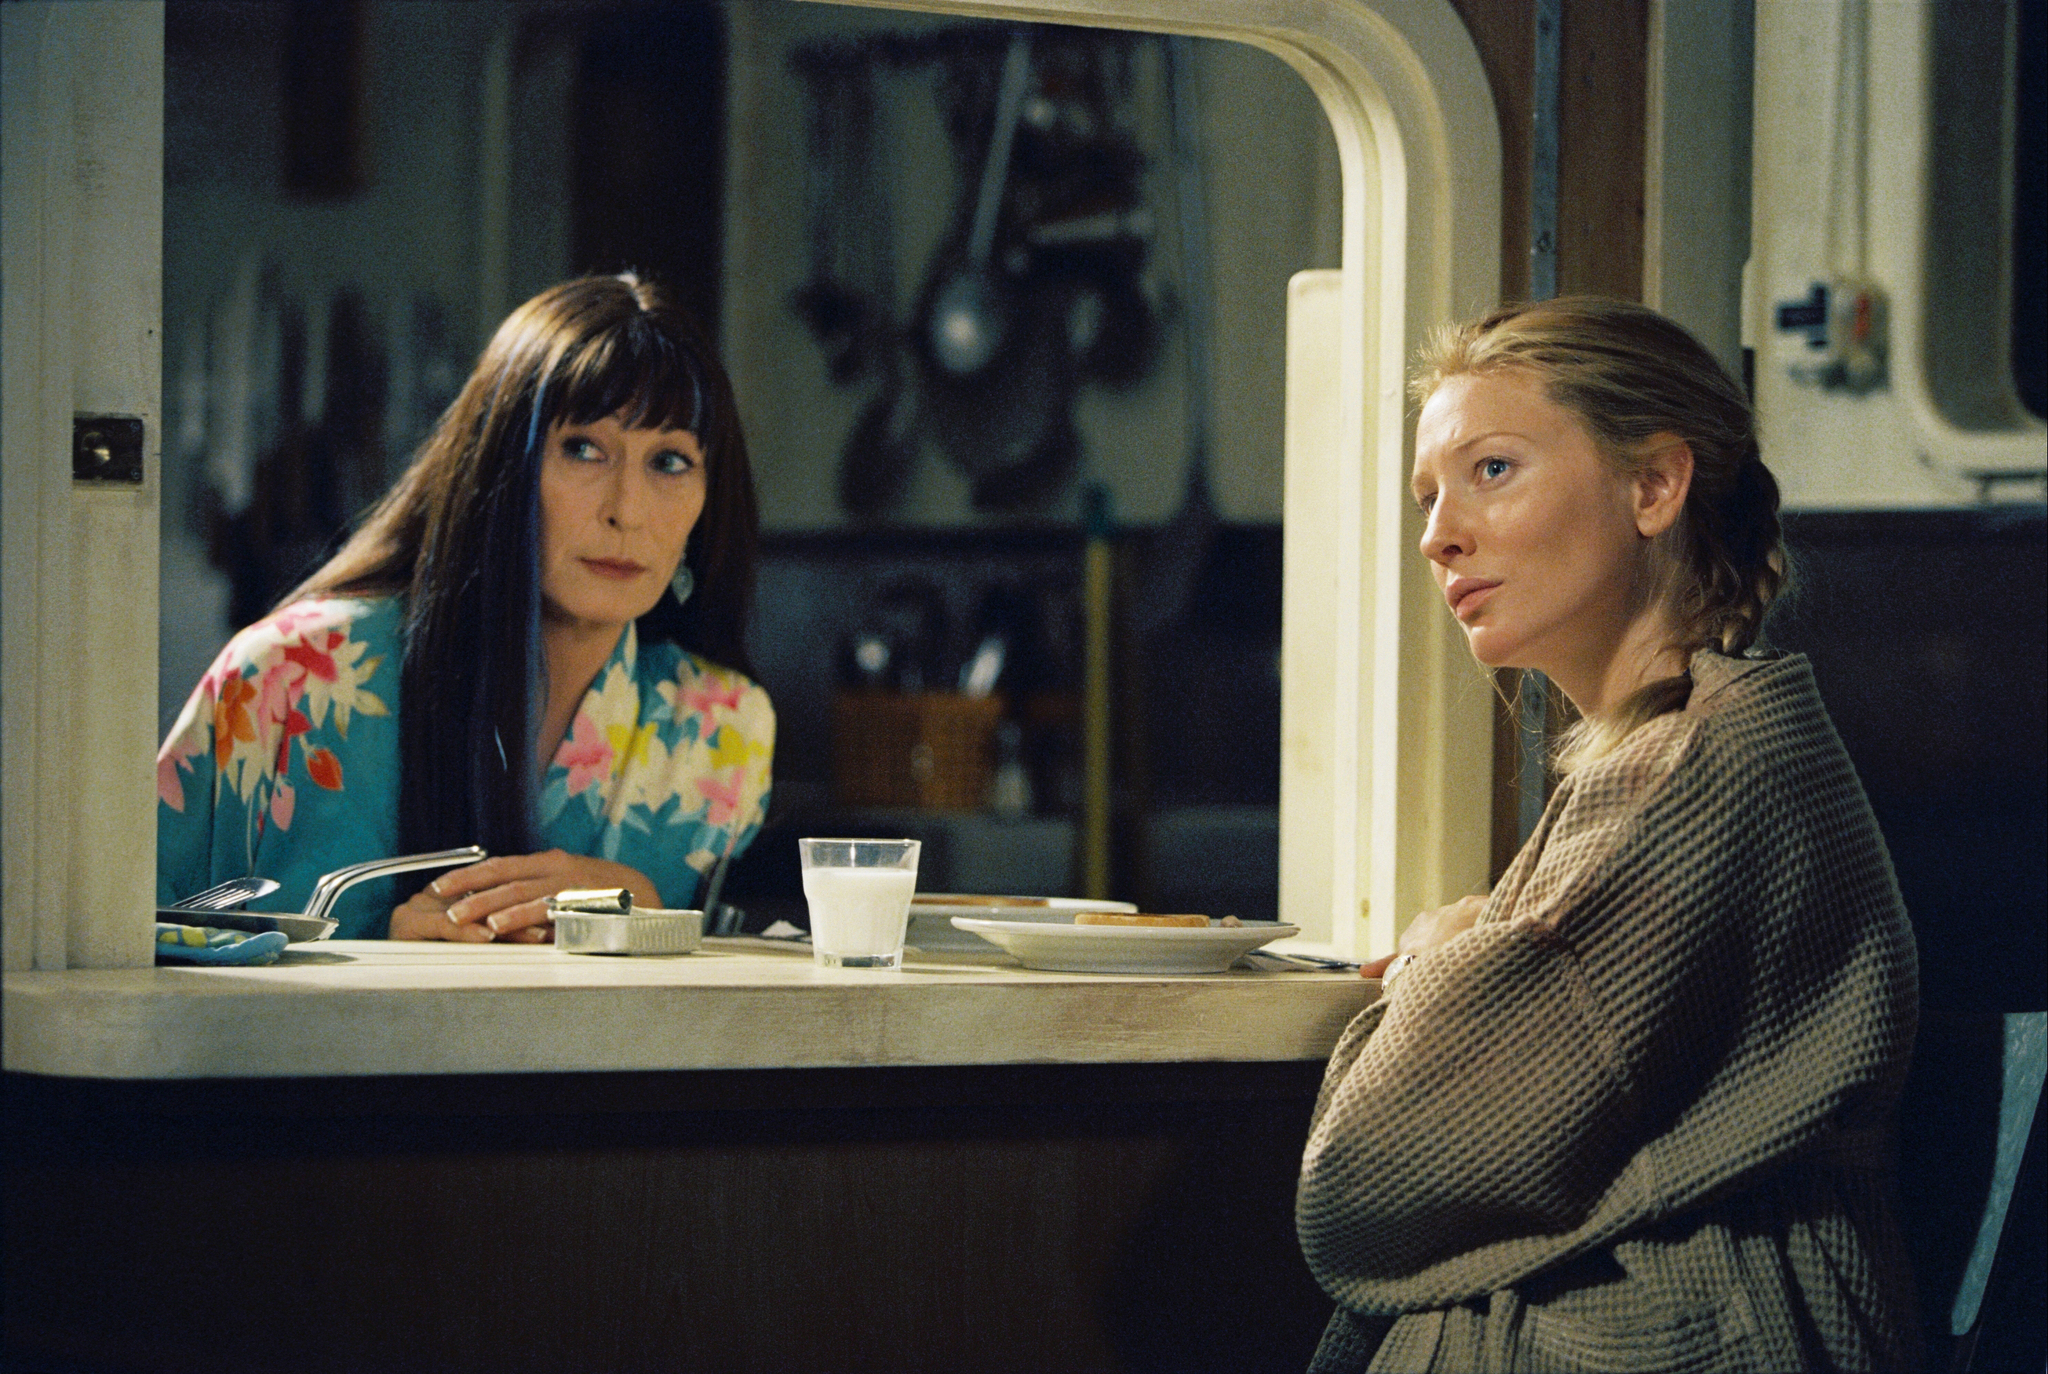 Still of Cate Blanchett and Anjelica Huston in The Life Aquatic with Steve Zissou (2004)